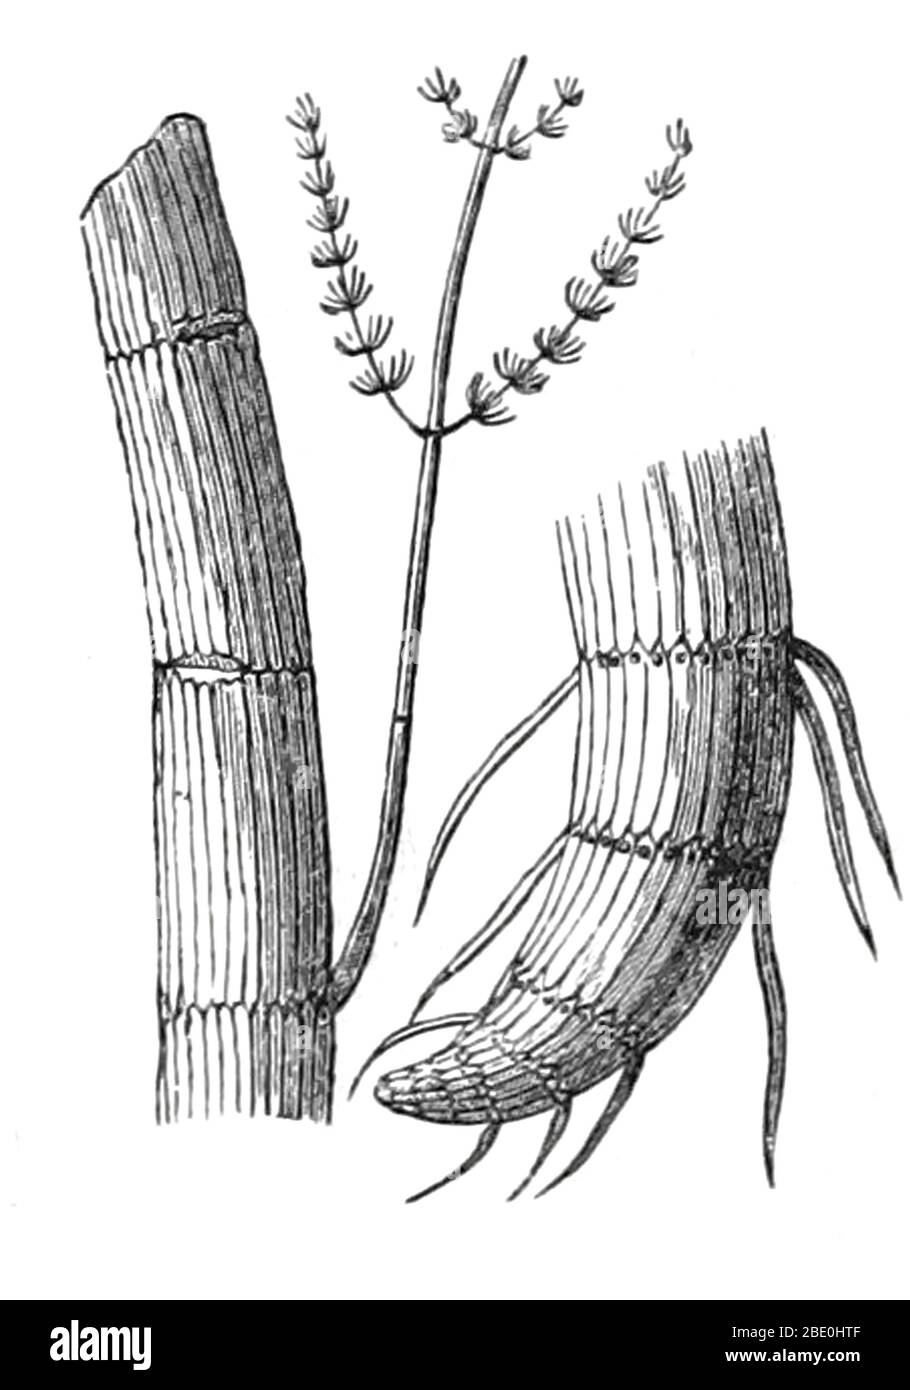 Paleozoic calamites, including a root (at right). Illustration from 1872. A calamite is any member of the lineage of giant horsetails, which belonged to the Sphenopsida, an important part of late Paleozoic vegetation. Calamites grew to be tree-sized plants with but with whorled branches seen in modern horsetails. A calamite root can be seen at right. The Paleozoic Era is the earliest of three geologic eras of the Phanerozoic Eon, spanning from roughly 541 to 252.17 million years ago. Stock Photo